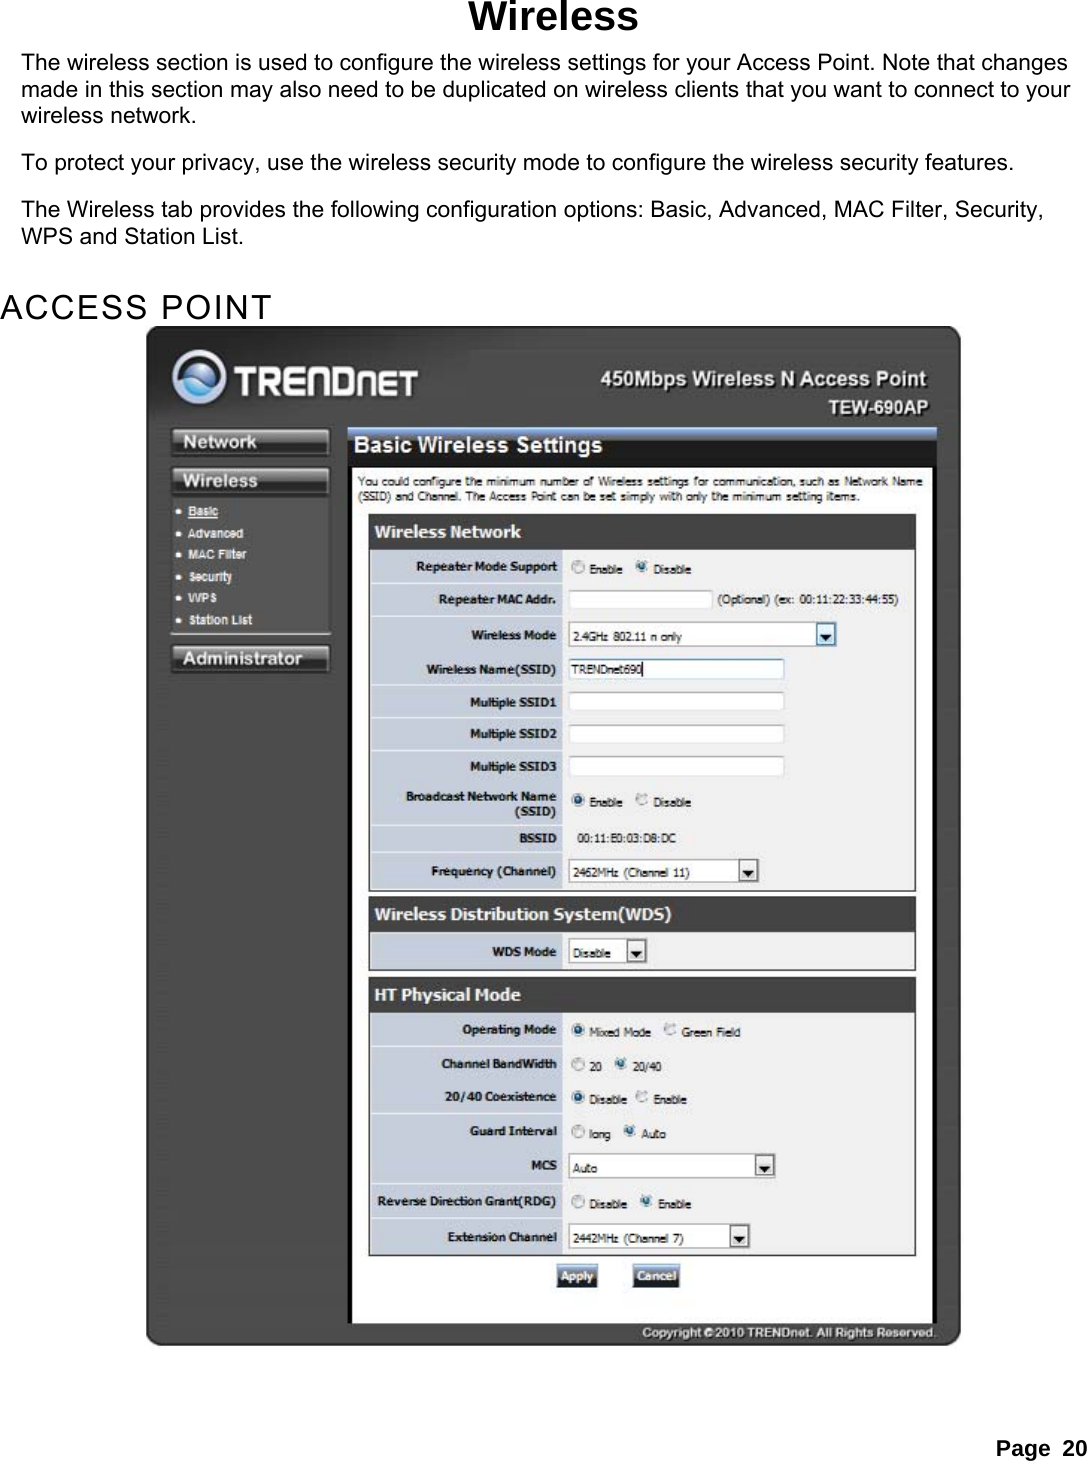 Page 20 Wireless The wireless section is used to configure the wireless settings for your Access Point. Note that changes made in this section may also need to be duplicated on wireless clients that you want to connect to your wireless network.   To protect your privacy, use the wireless security mode to configure the wireless security features.   The Wireless tab provides the following configuration options: Basic, Advanced, MAC Filter, Security, WPS and Station List.    ACCESS POINT    